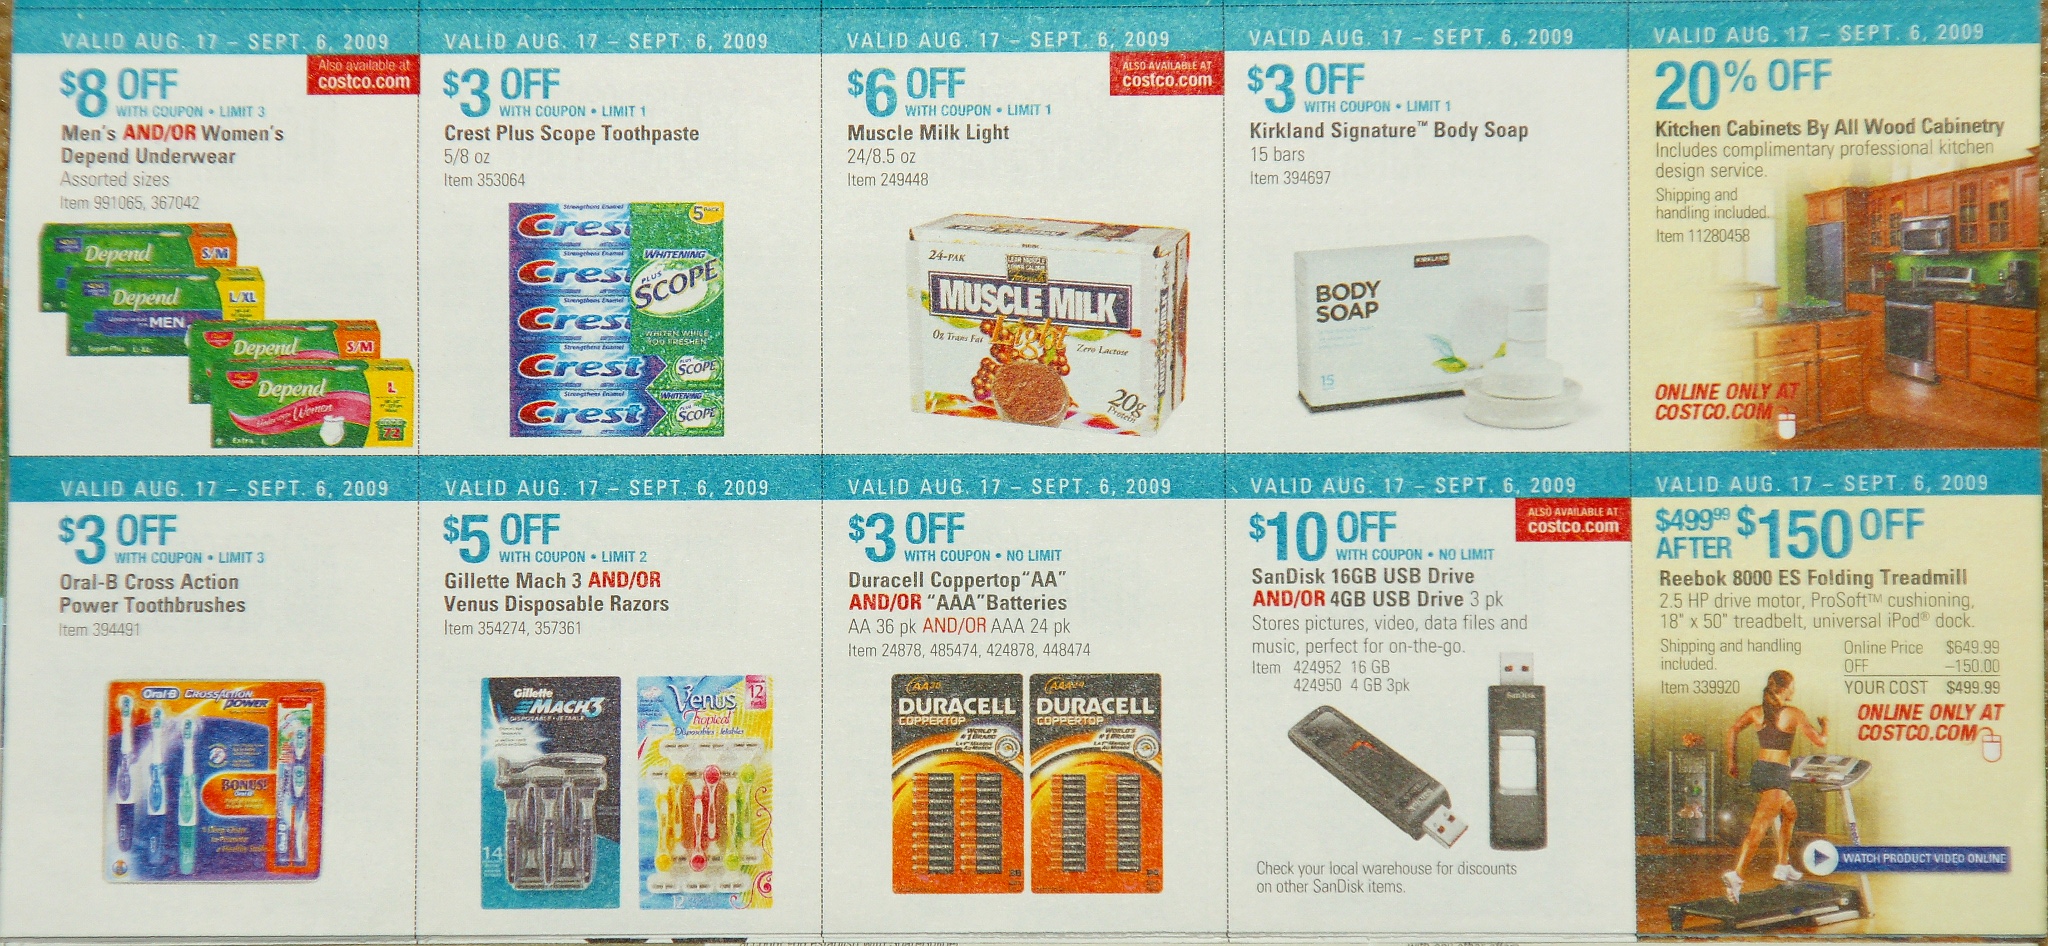 Full image coupon book page ->6<-